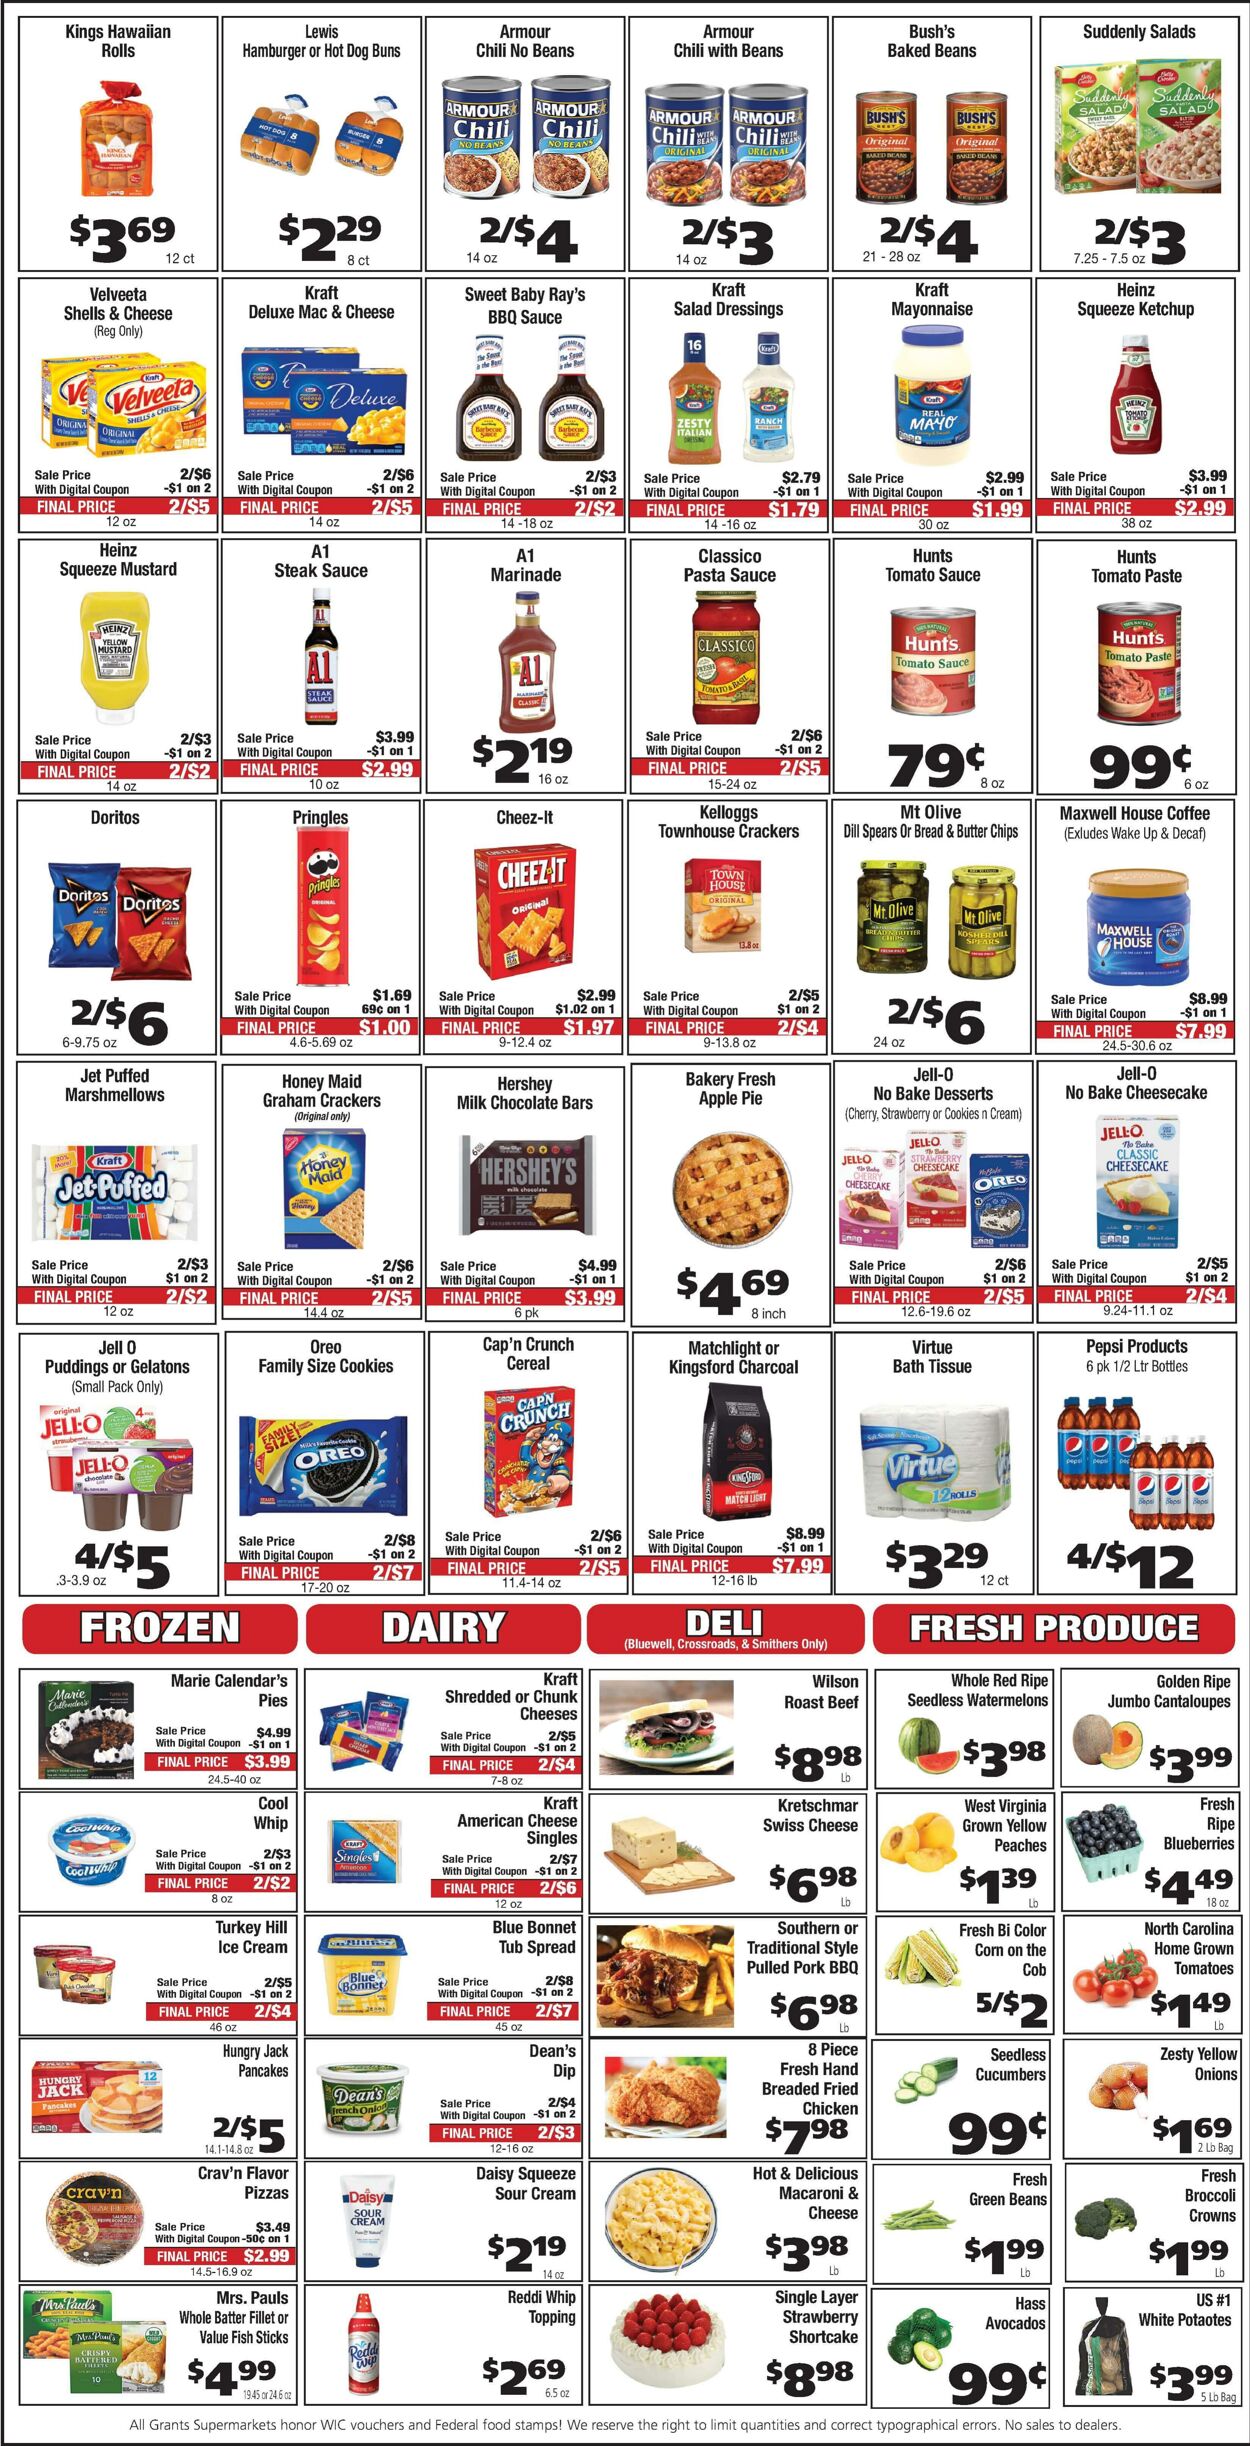 Weekly ad Grant's Supermarkets 08/31/2022 - 09/06/2022